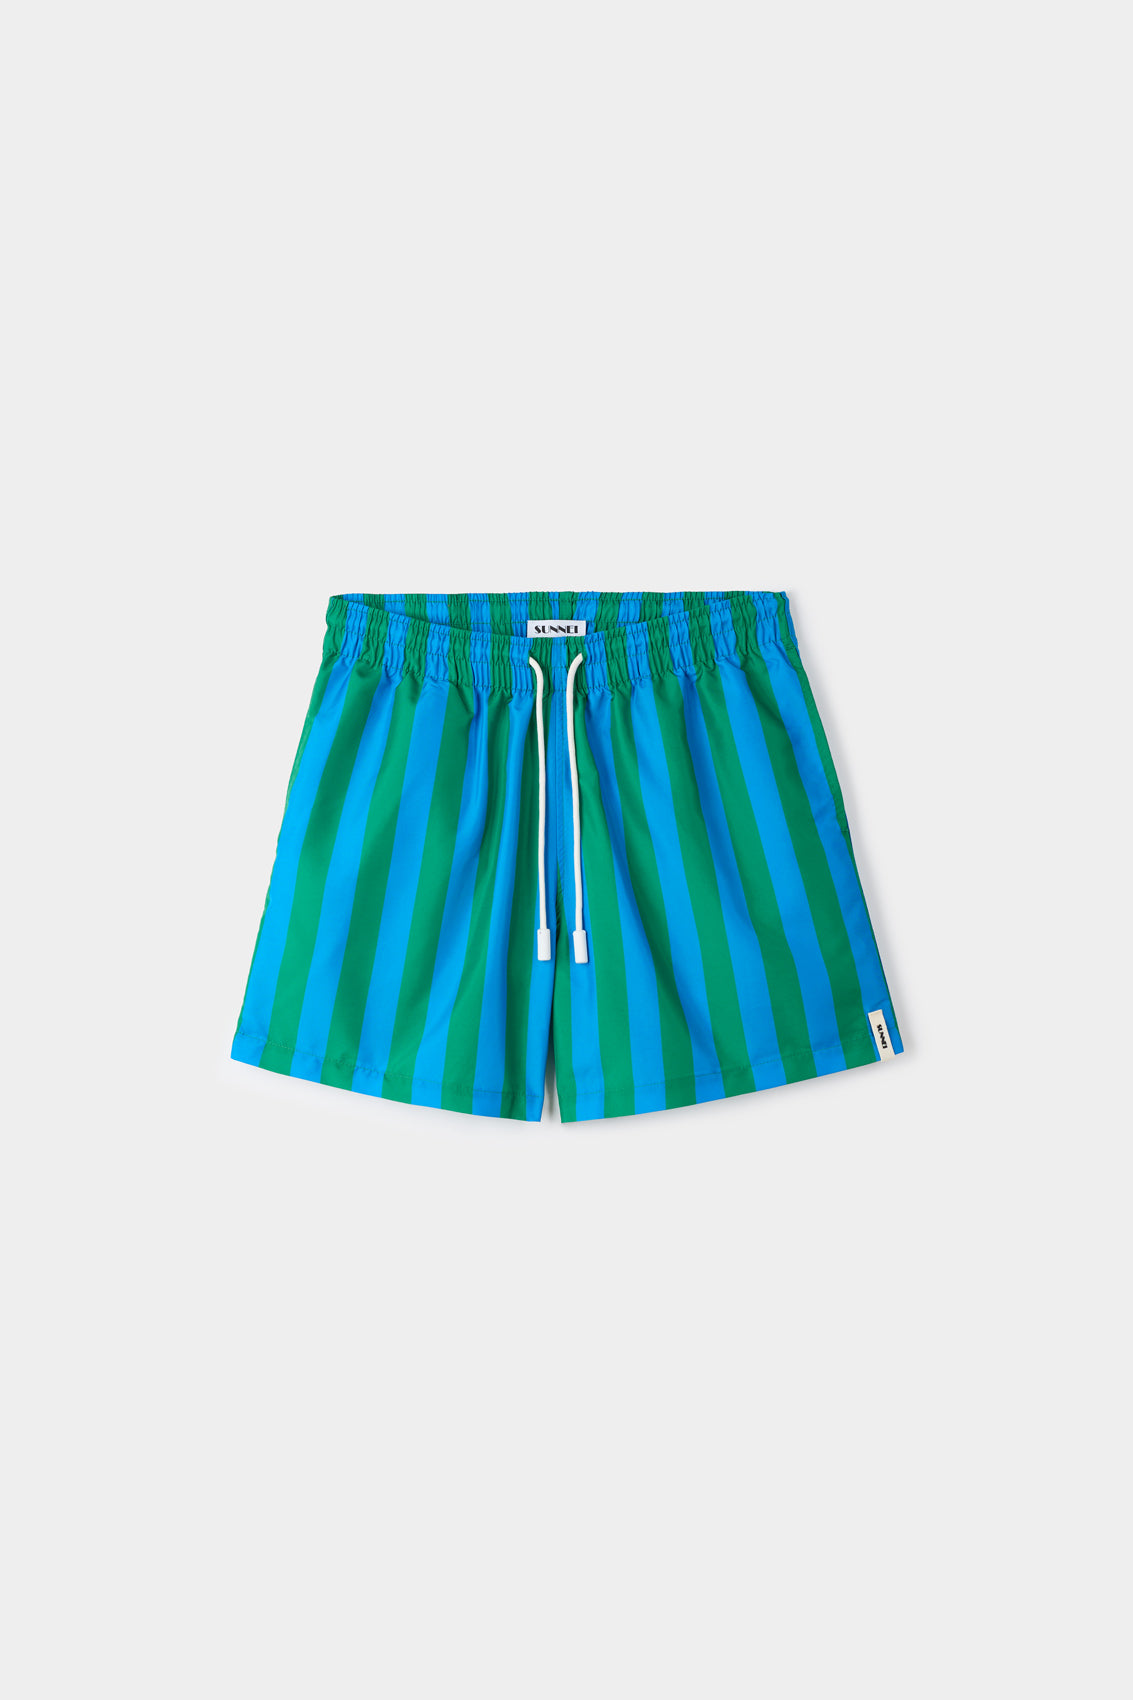 SWIMSHORTS / azure and greens stripes